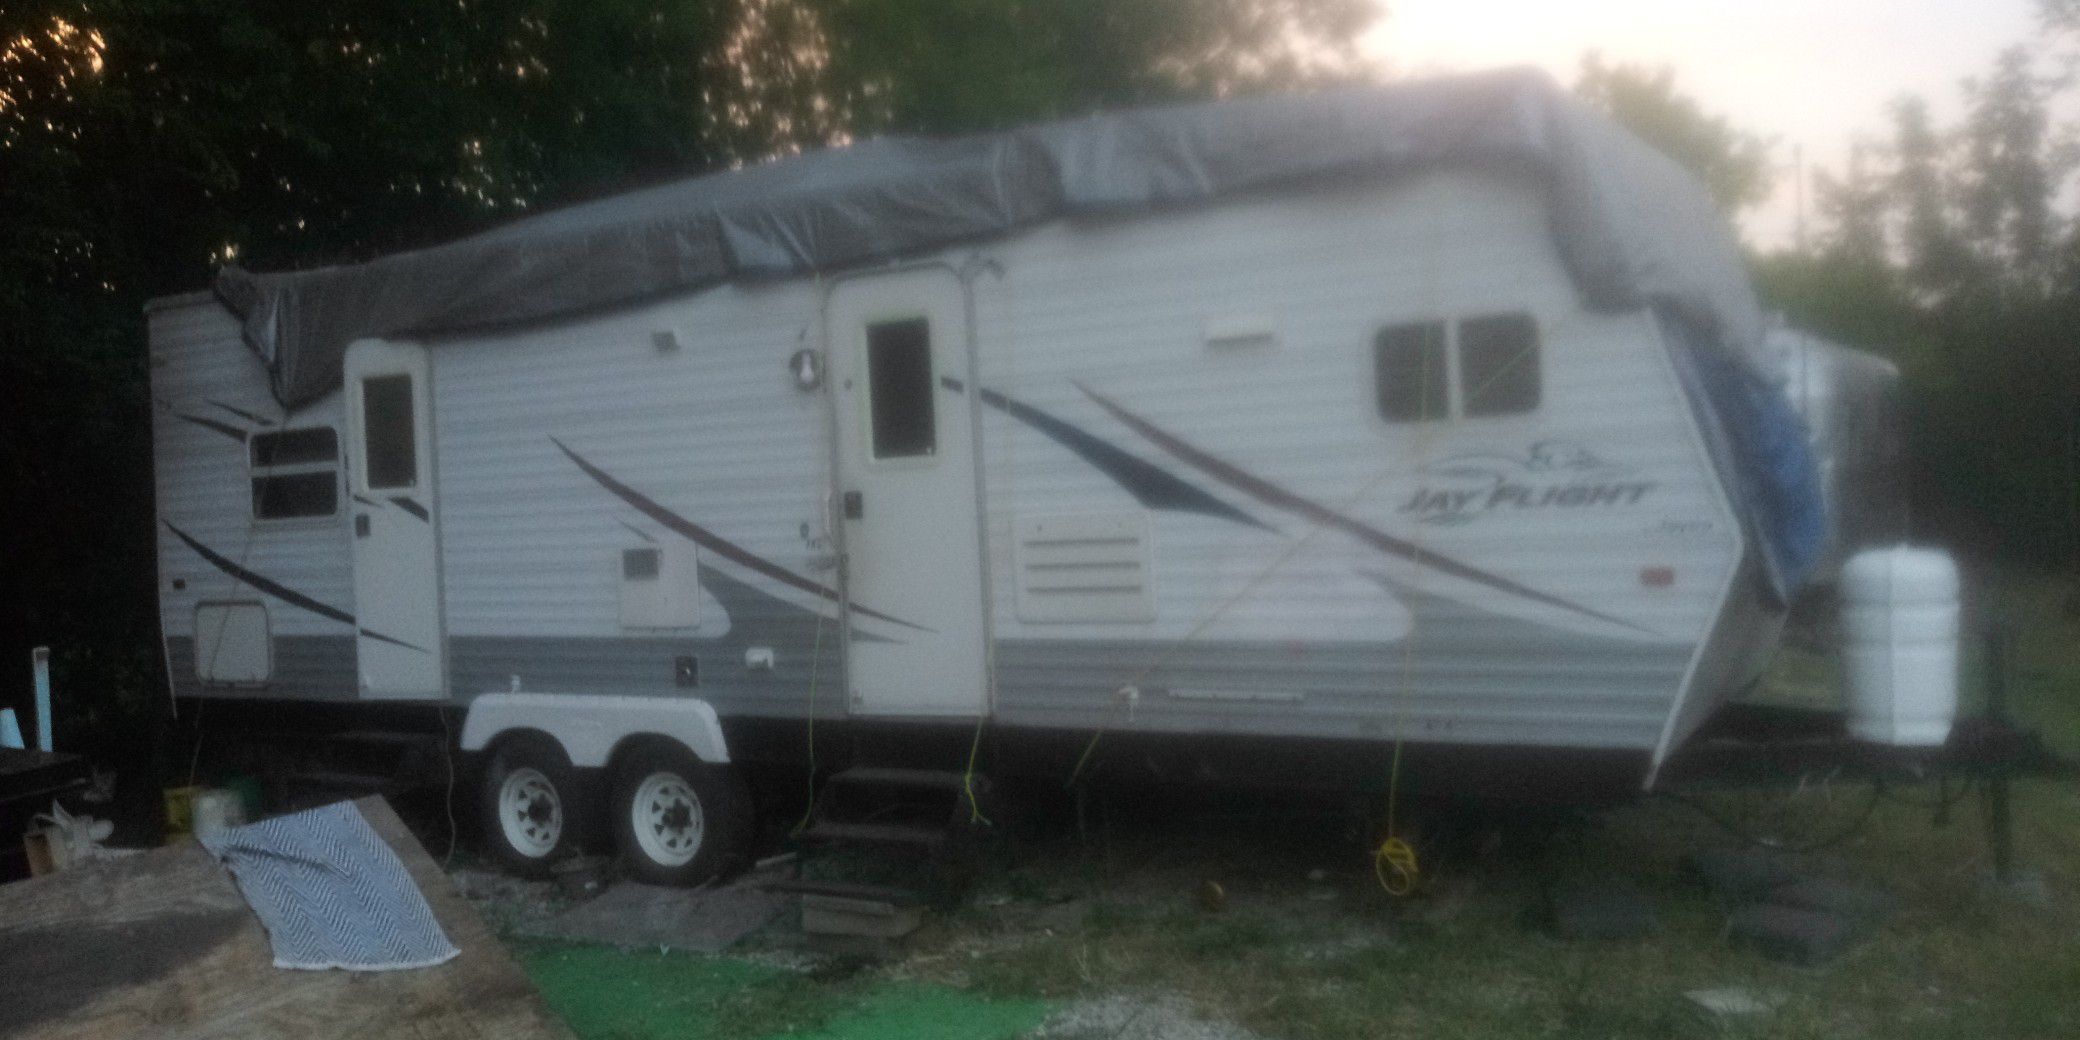 2006 31ft. Jay Flight Travel trailer with pop-out. Needs minor repairs. $2000 or best offer. Please contact Henry or Tammy {contact info removed}.